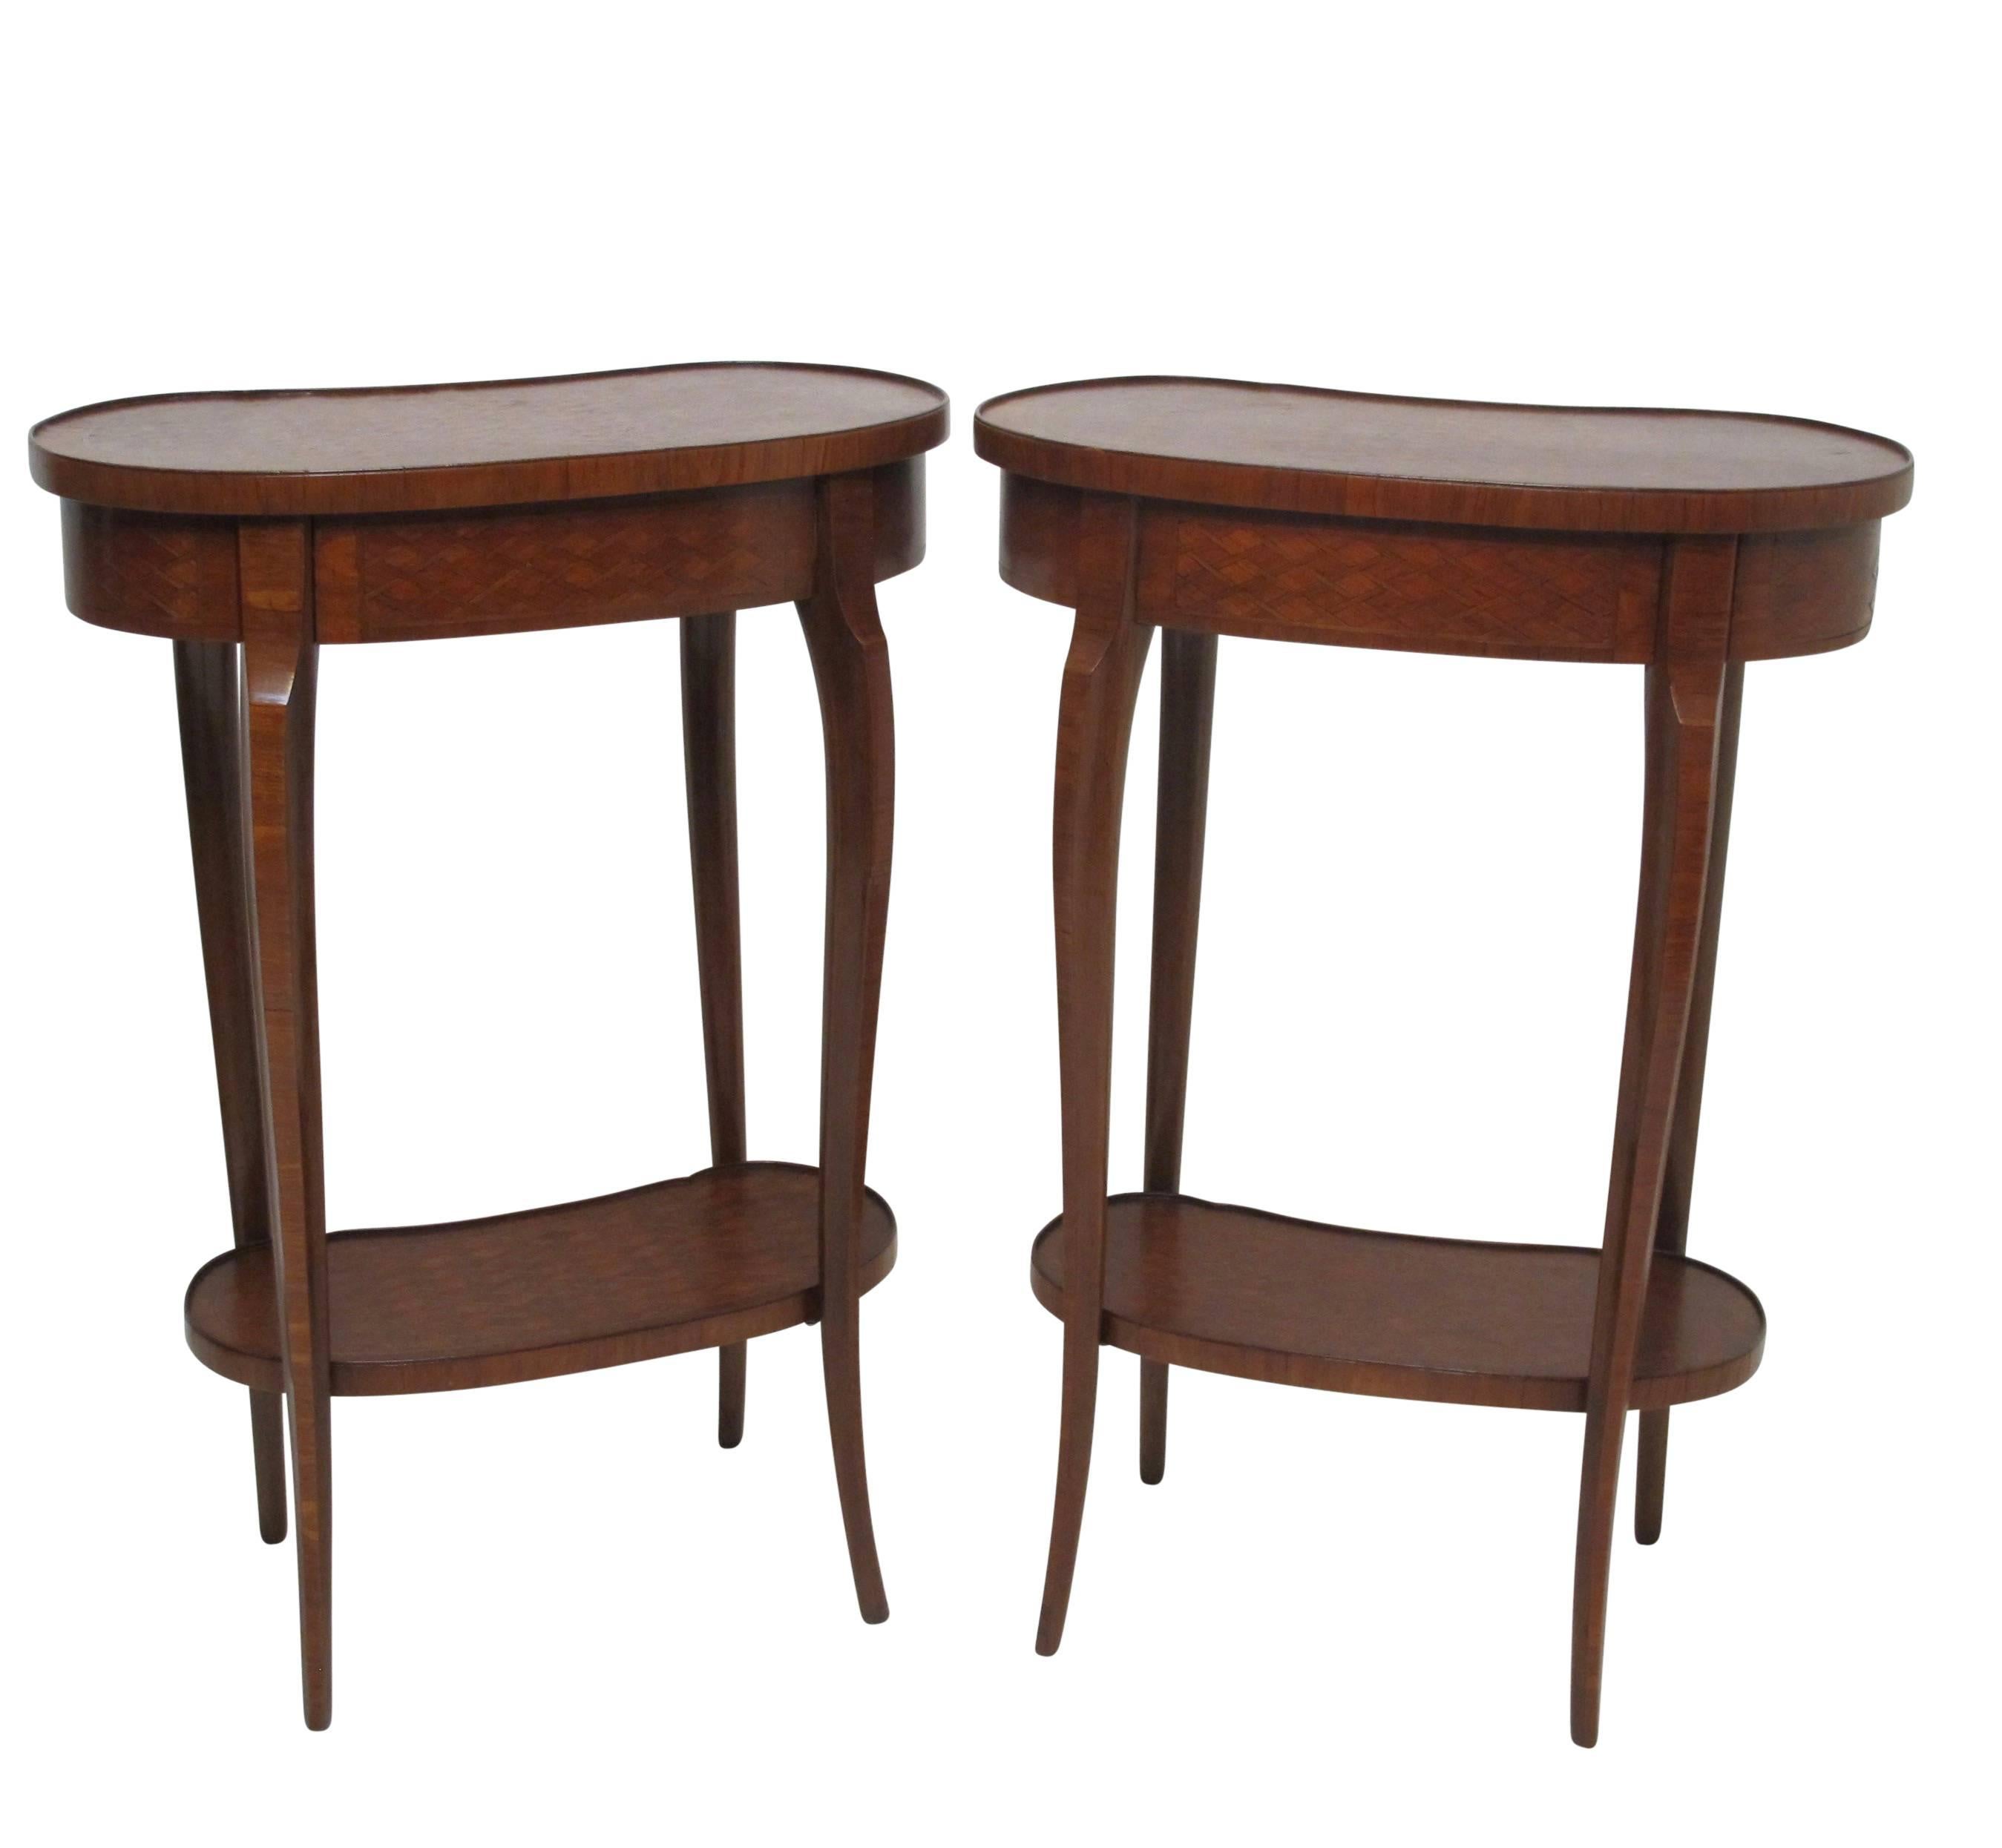 Pair of Mahogany Kidney Shape Parquetry Inlay Side Tables, French, circa 1900 3